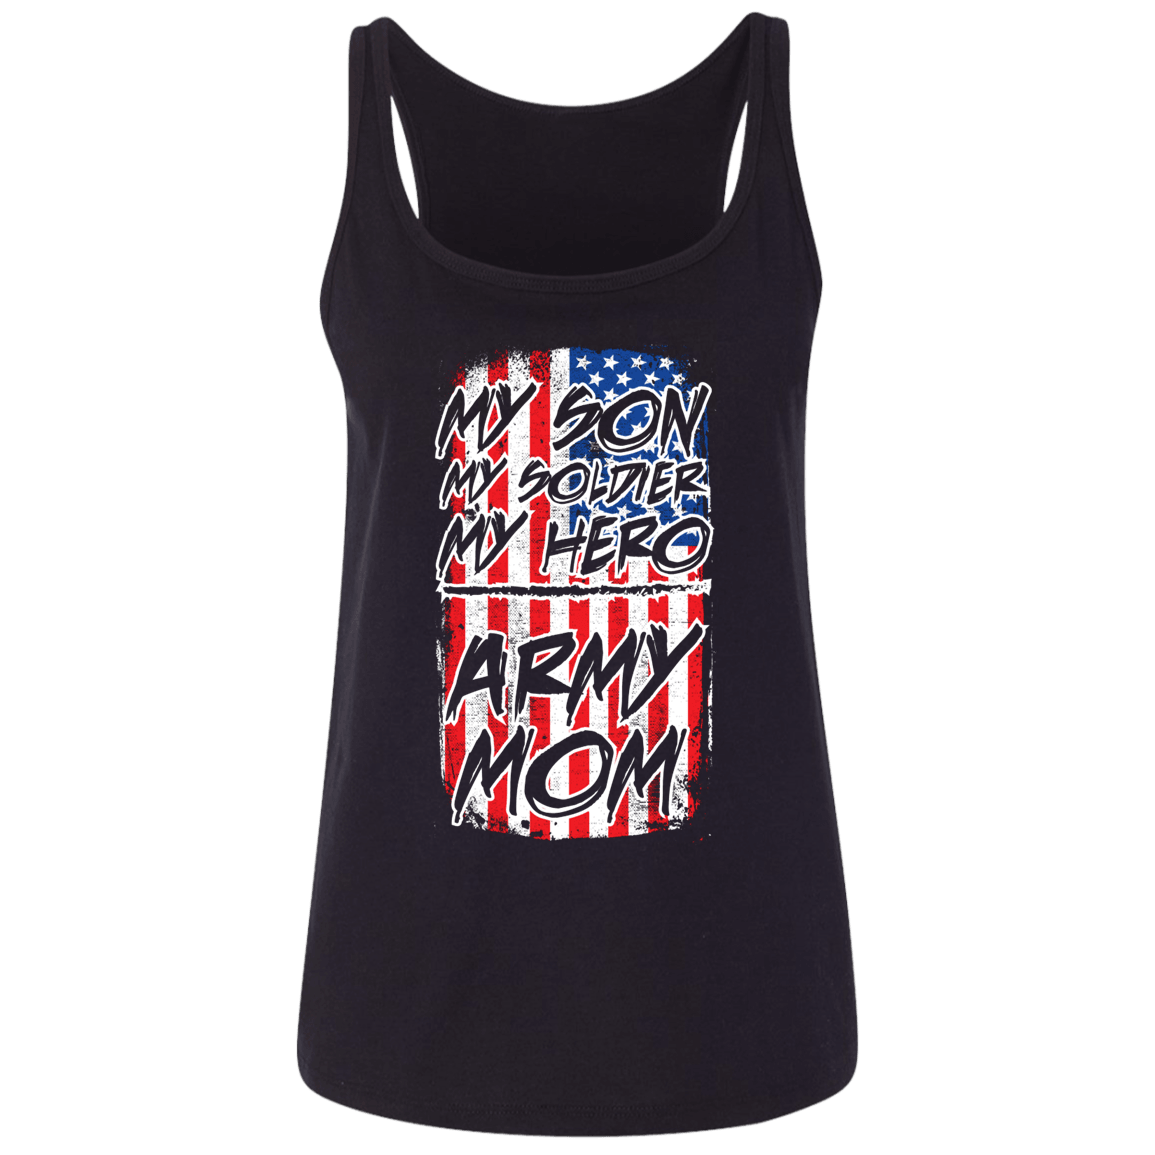 Designs by MyUtopia Shout Out:My Son My Soldier My Hero Army Mom Ladies' Relaxed Jersey Tank,S / Black,Tank Tops